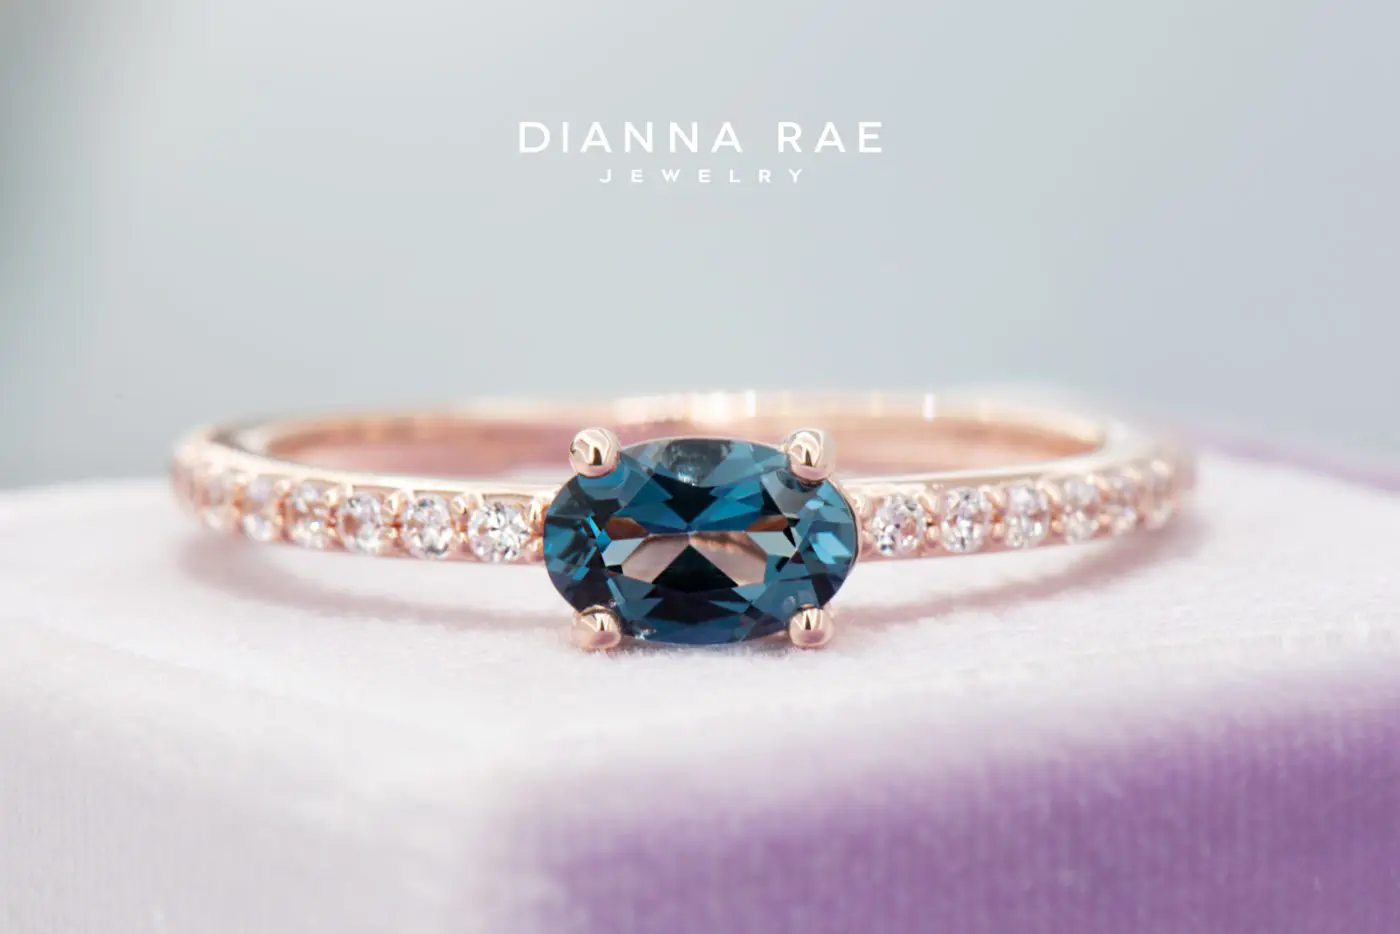 001-210-00061_STU122190_Rose-Gold-Oval-East-West-London-Blue-Topaz-Class-Ring-with-Cubic-Zirconia-Band-Stackable-Ring_01-1